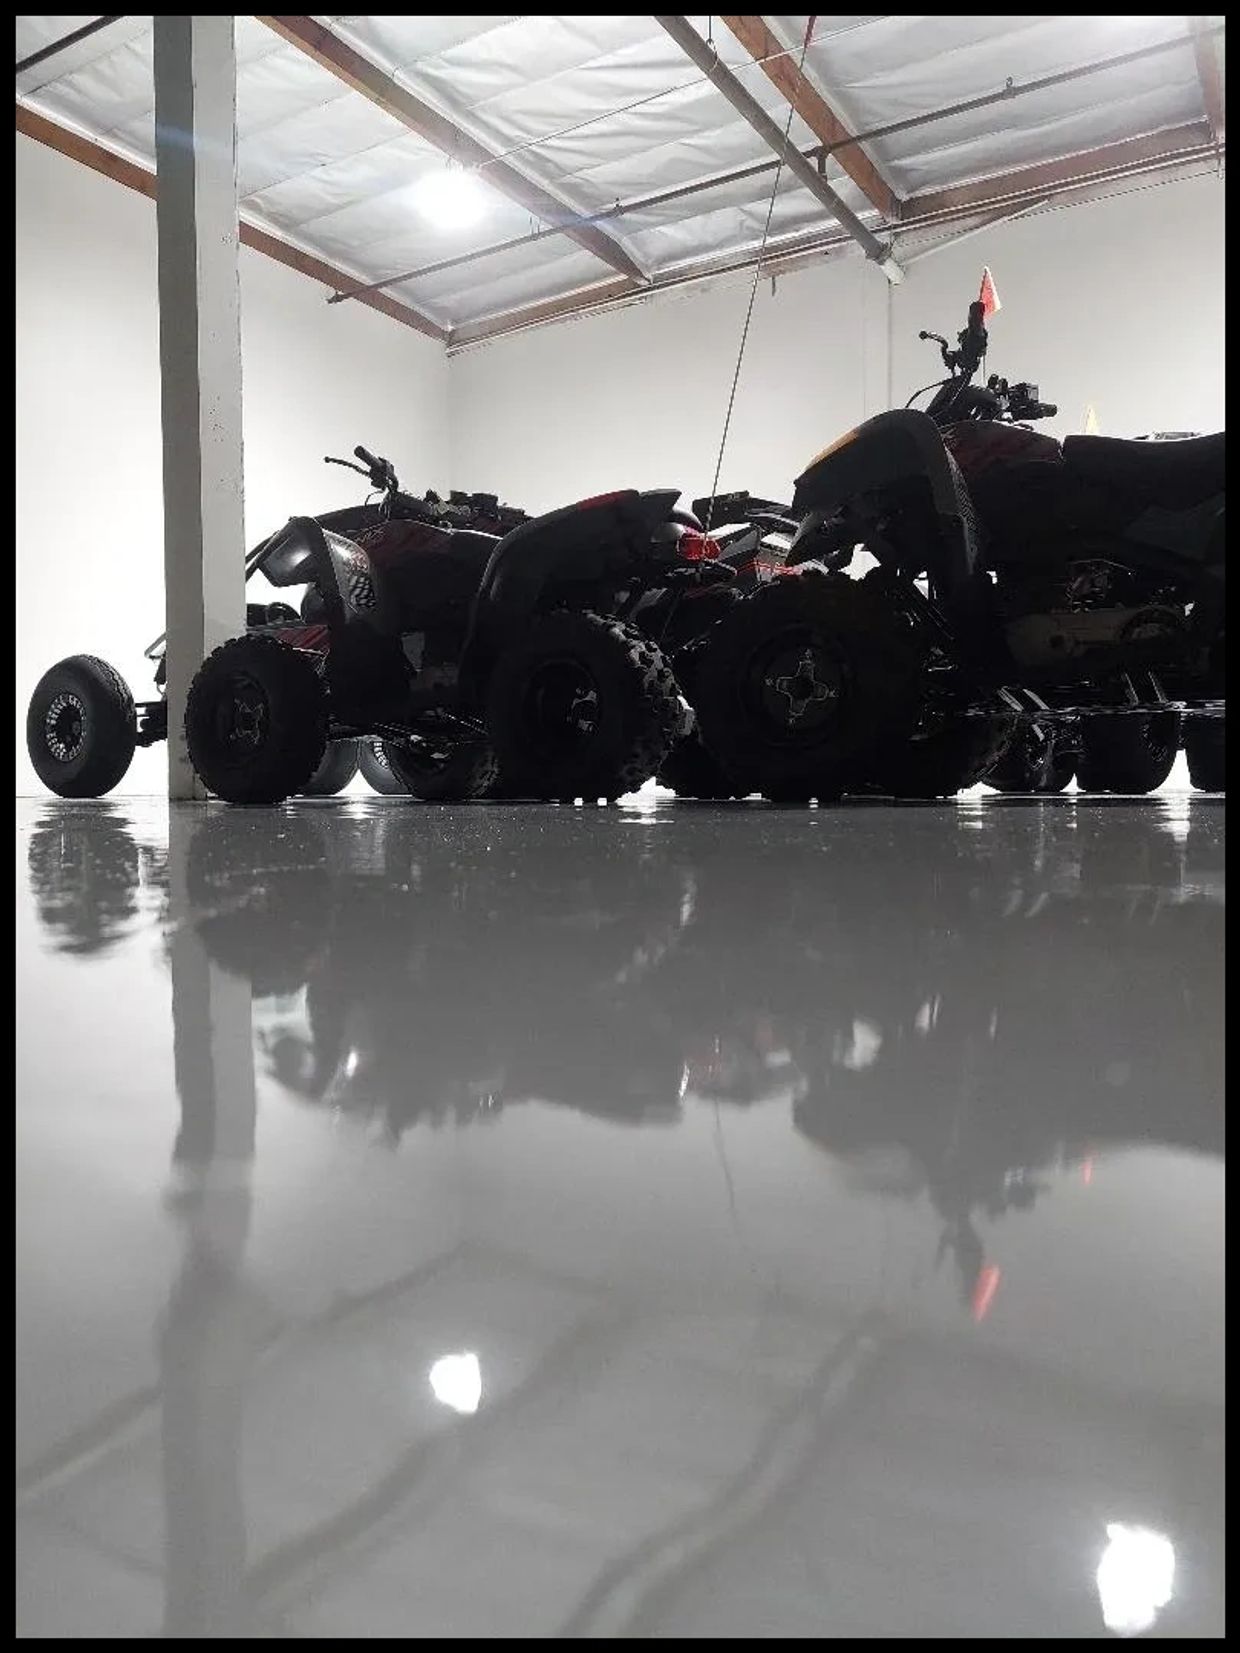 Recreational equipment sitting on a glossy epoxy floor in a warehouse.